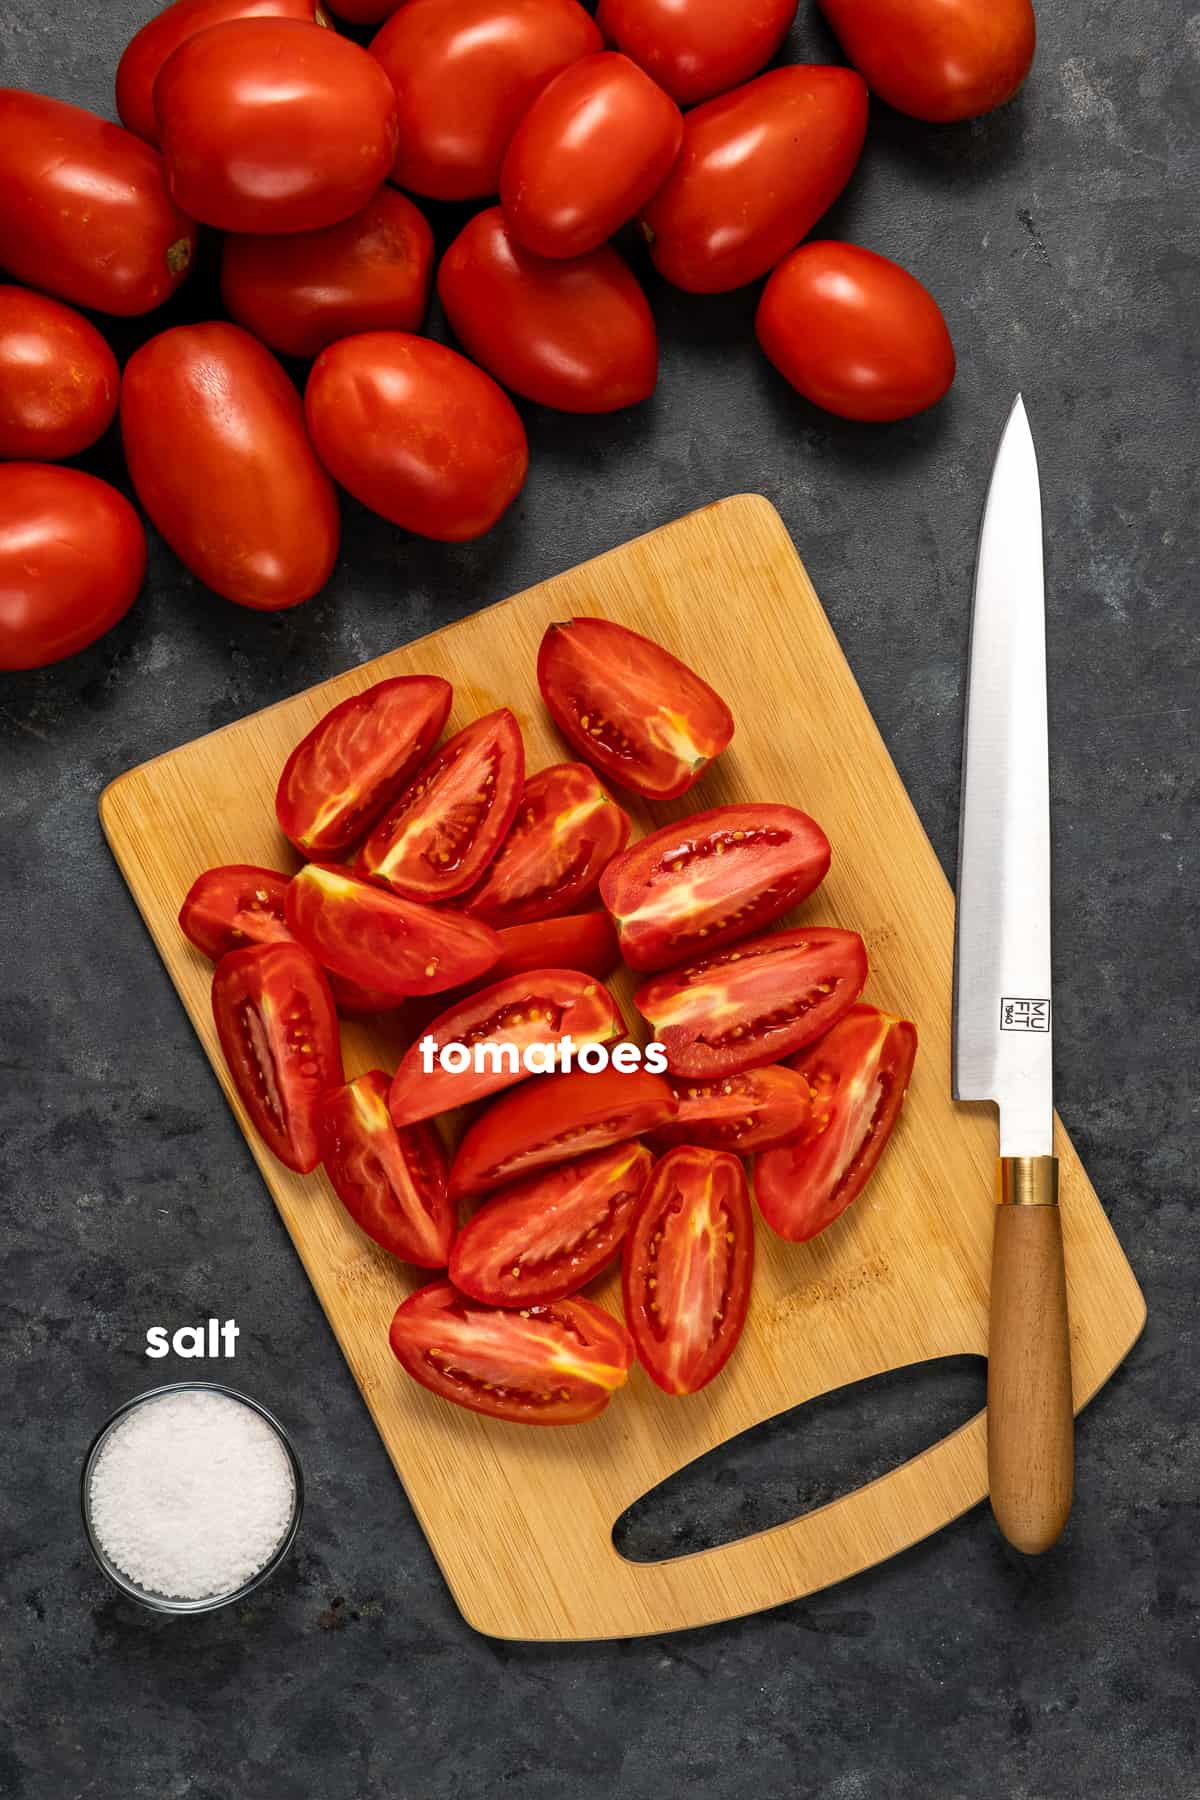 Quarted tomatoes on a wooden cutting board, a knife on it, kosher salt in a small bowl and whole tomatoes on the side.